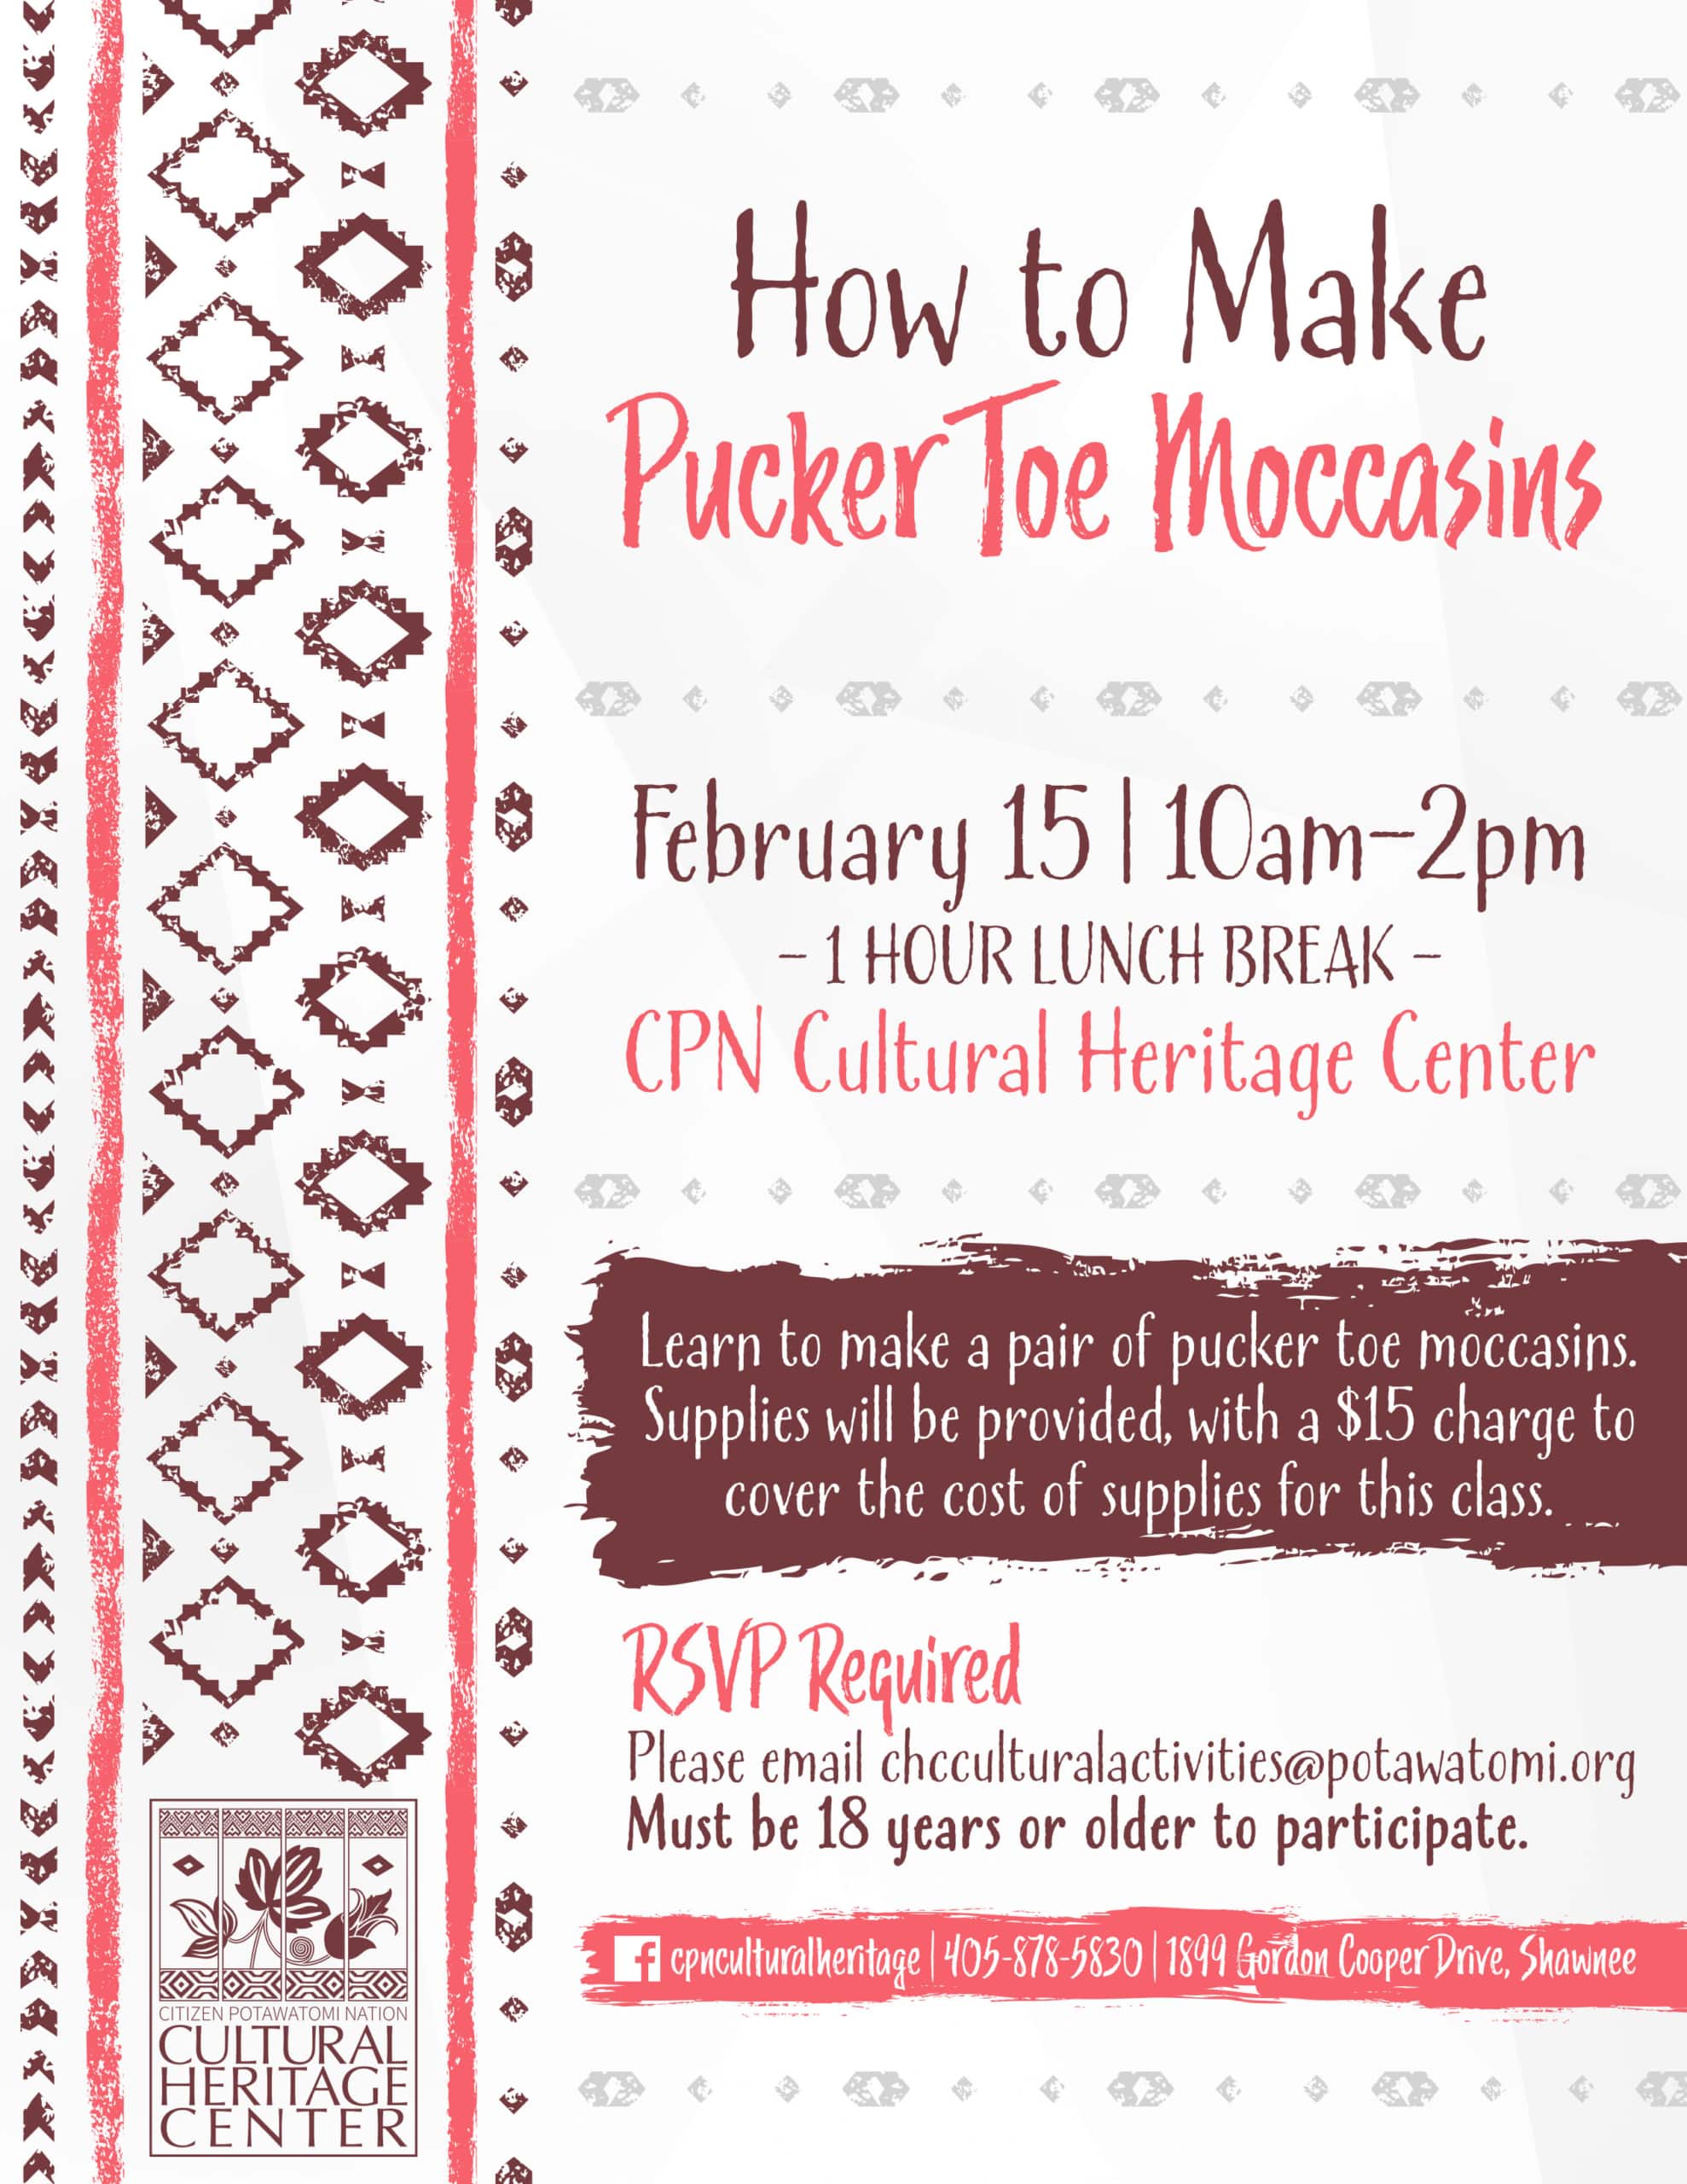 Purple and pink geometric designs frame an invitation to join Cultural Activities Coordinator Leslie Deer for a class on how to make pucker toe moccasins on Wednesday, February 15, 2023, from 10 a.m. to 2 p.m. at the Cultural Heritage Center. Supplies will be provided, with a $15 charge to cover the cost of supplies for this class. There will be a one-hour lunch break. RSVP is required. Please email chculturalactivities@potawatomi.org. Participants must be 18 years or older.